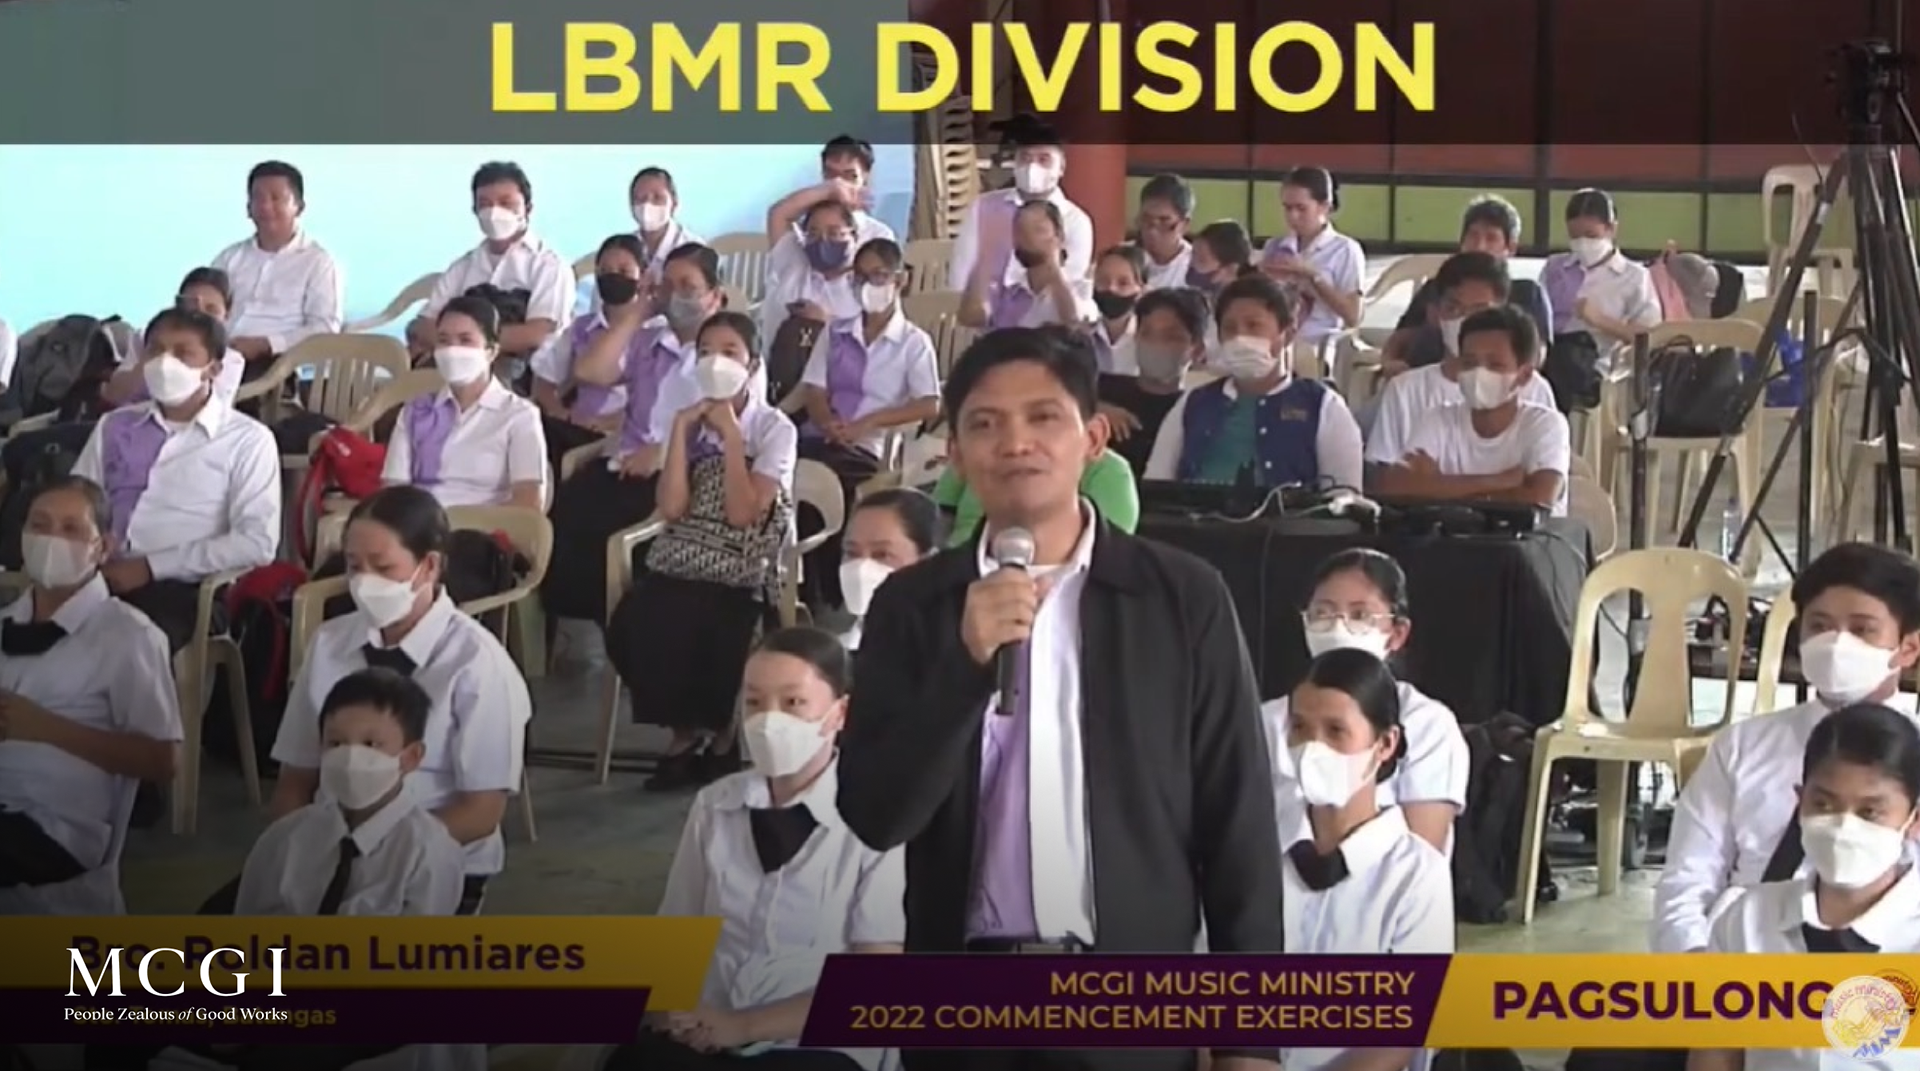 Photo shows the LBMR Division on screen, another venue of the Pagsulong 2022 with in-person gathering